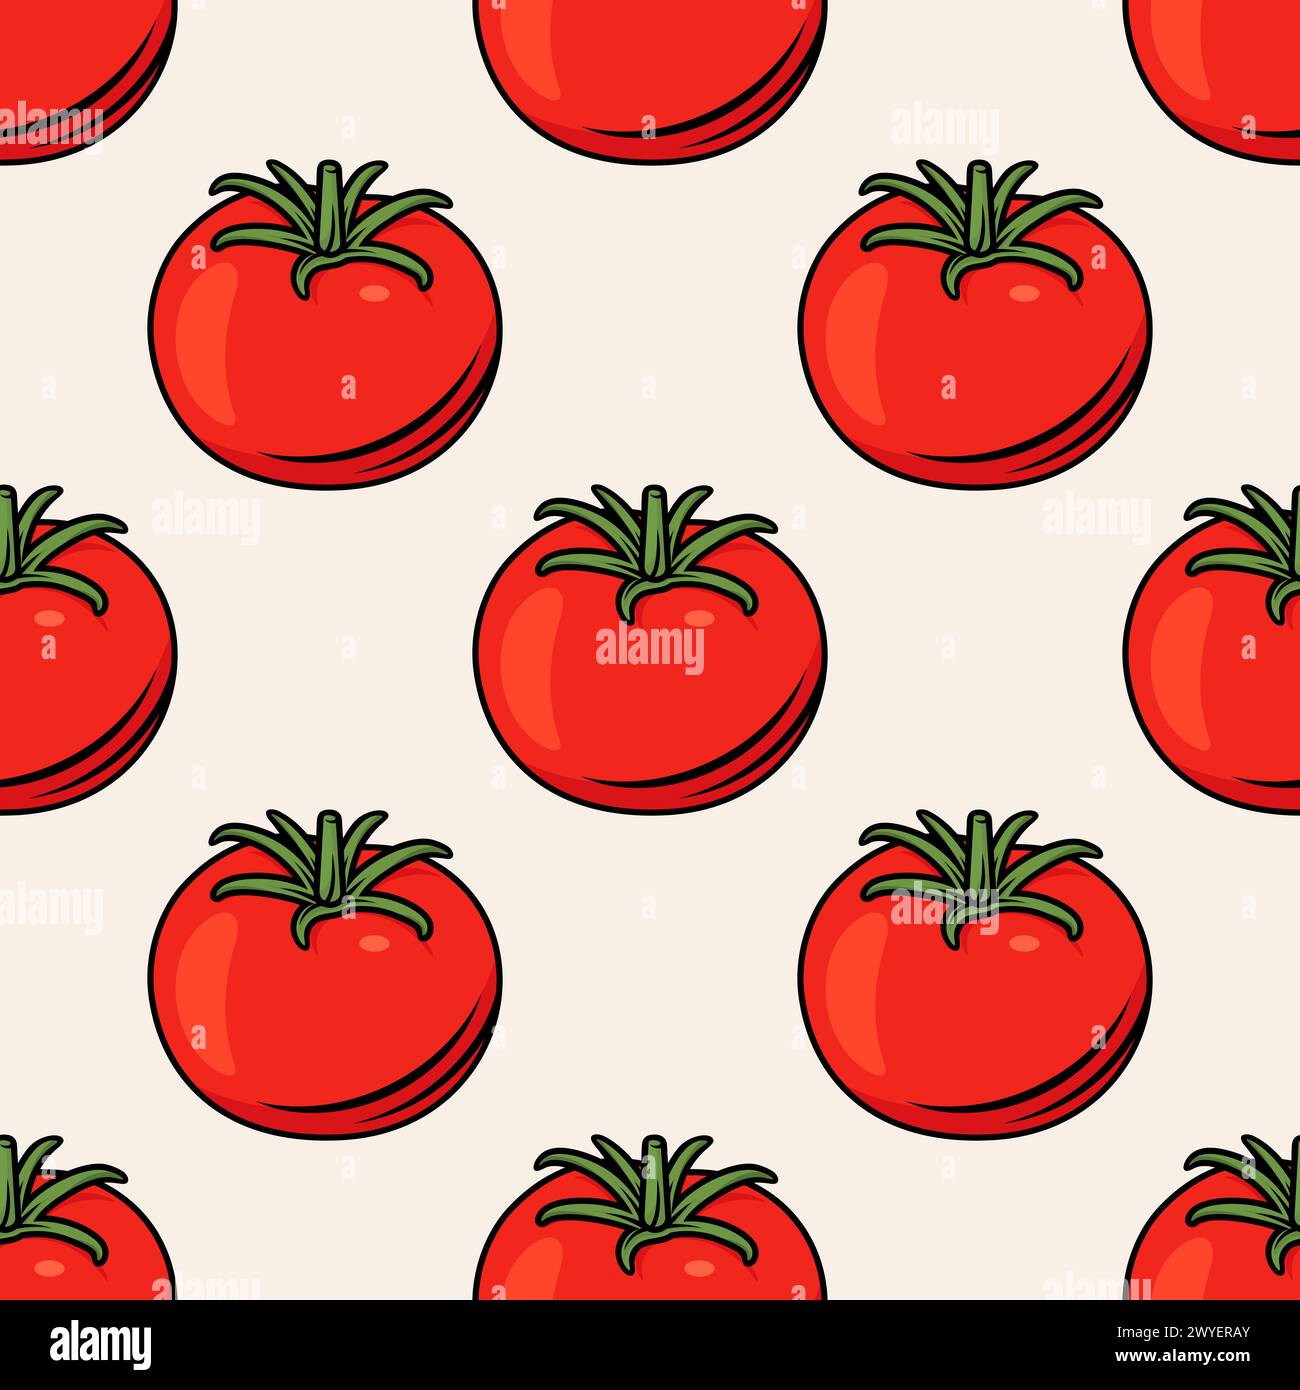 Flat Vector Seamless Pattern with Fresh Tomato on White Background. Seamless Vegetable Print with Whole Tomatoes Stock Vector